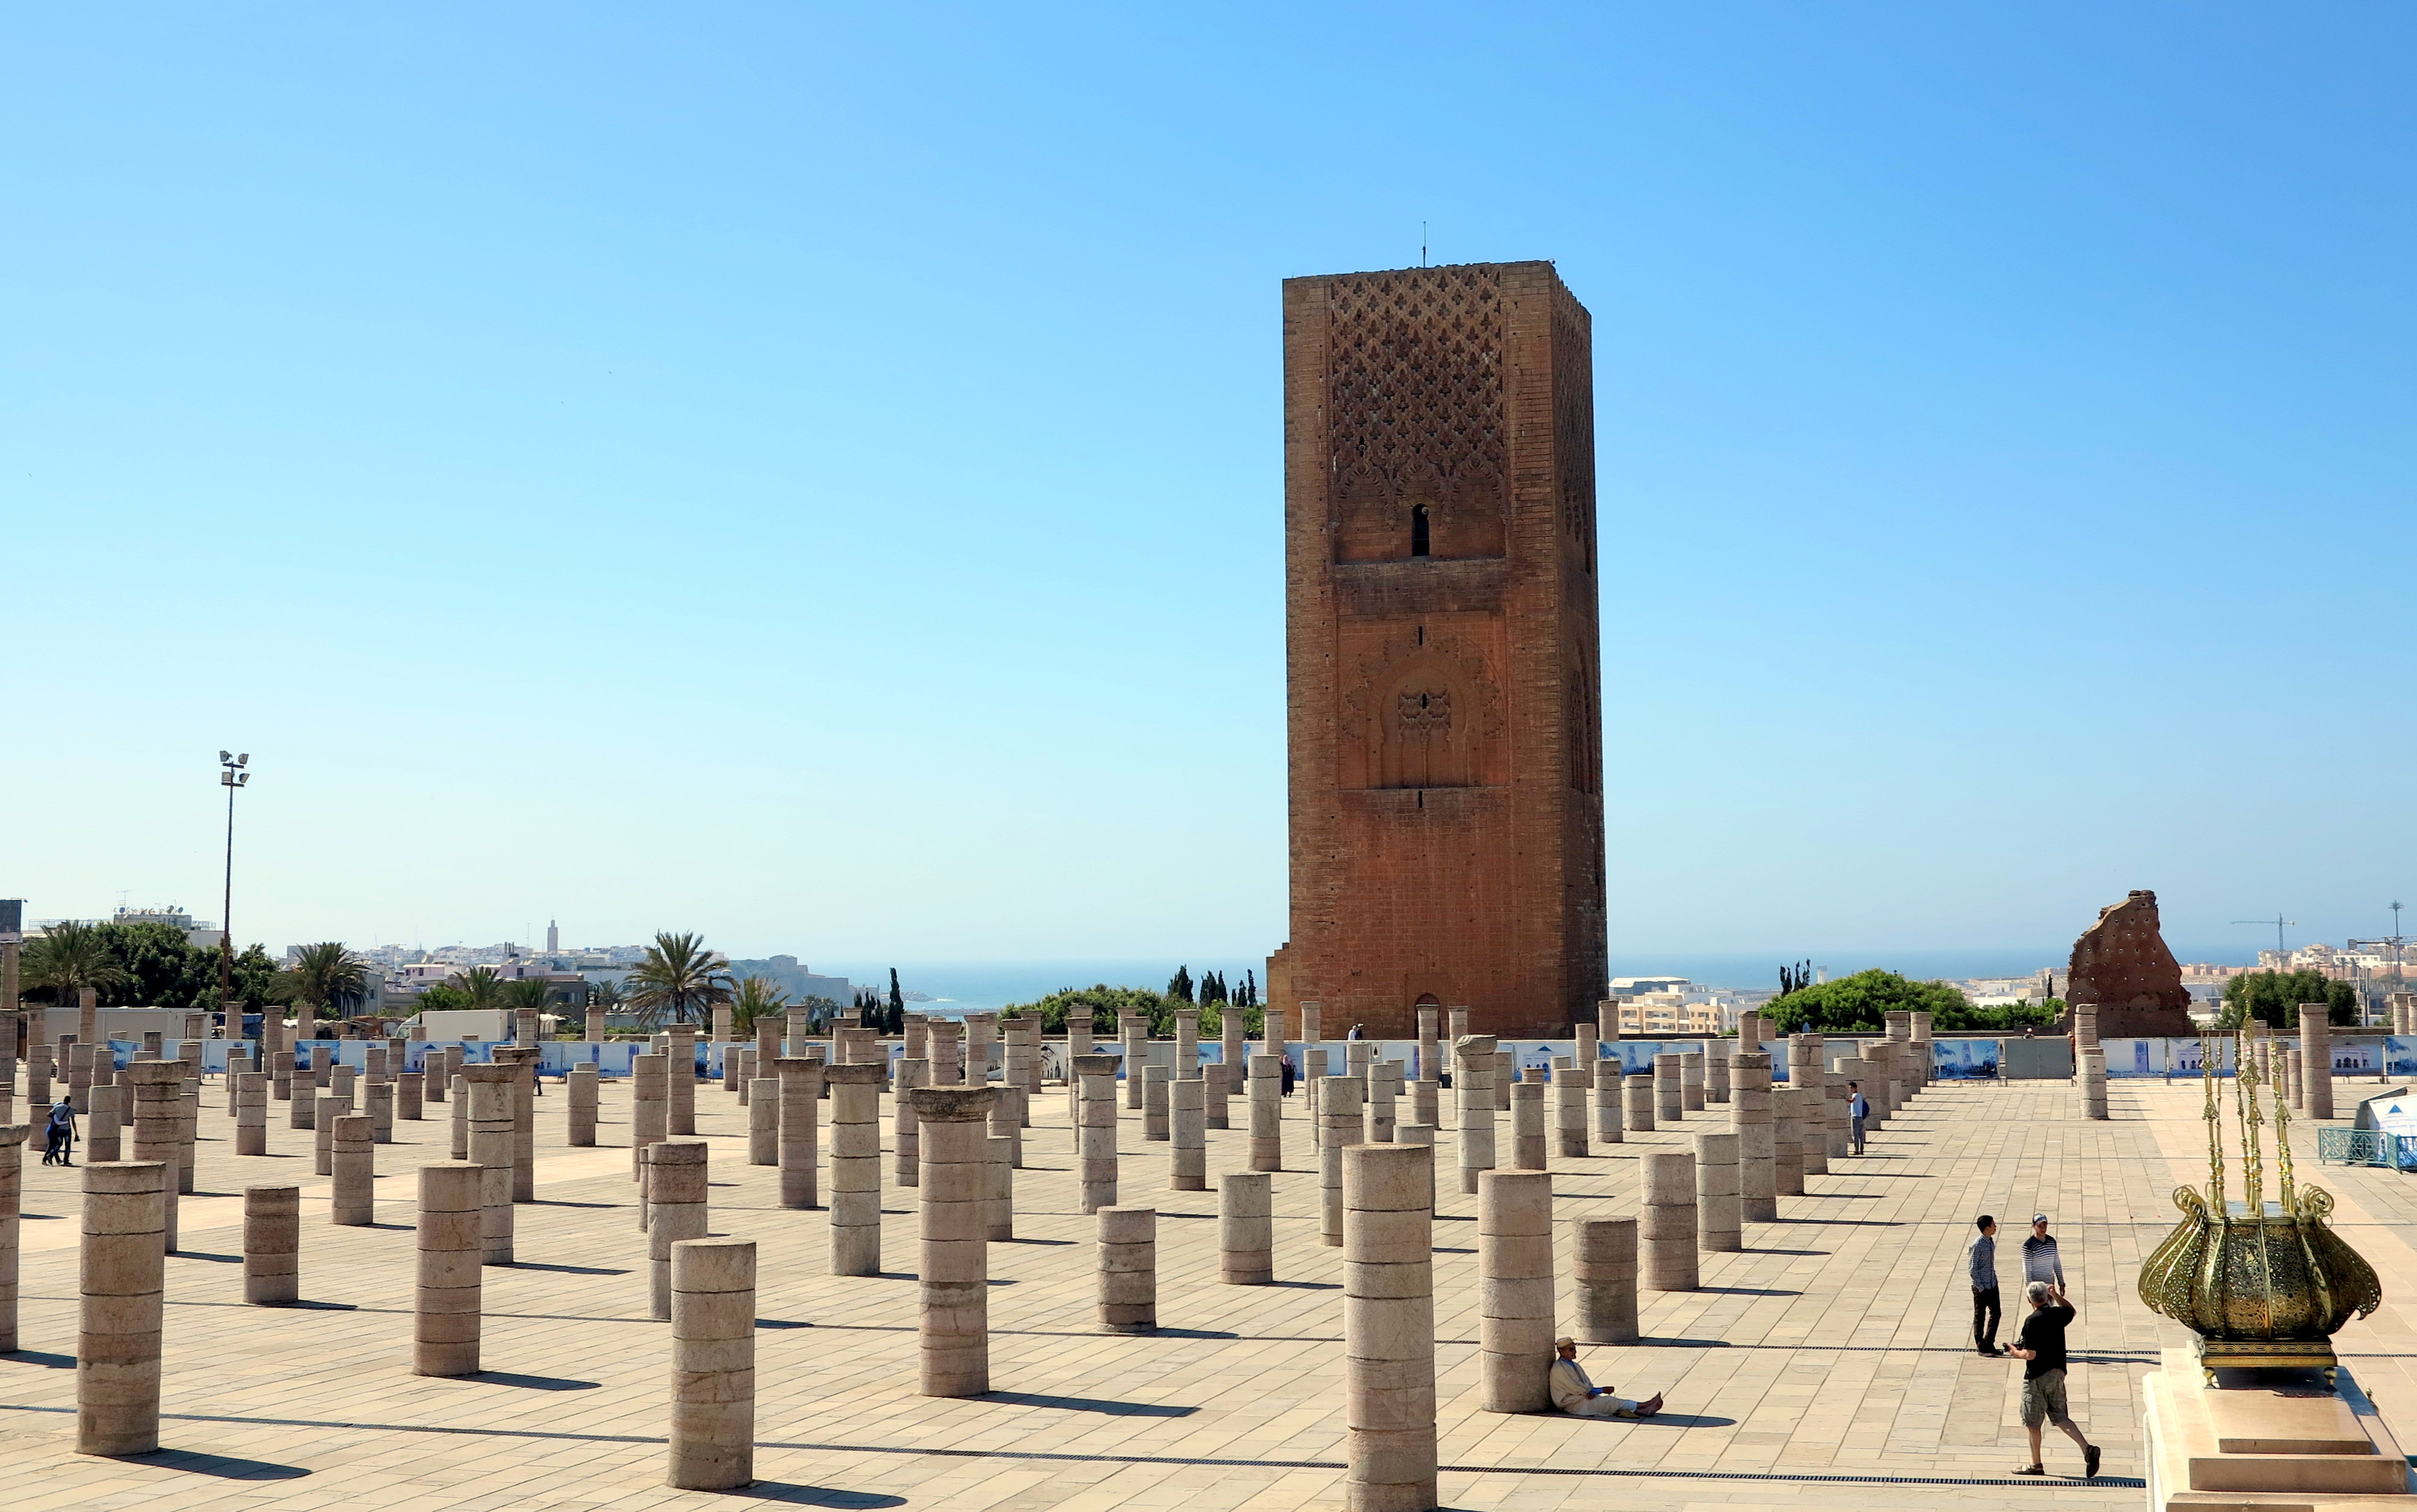 Hassan II Tower from Mohammed V Tomb, Rabat